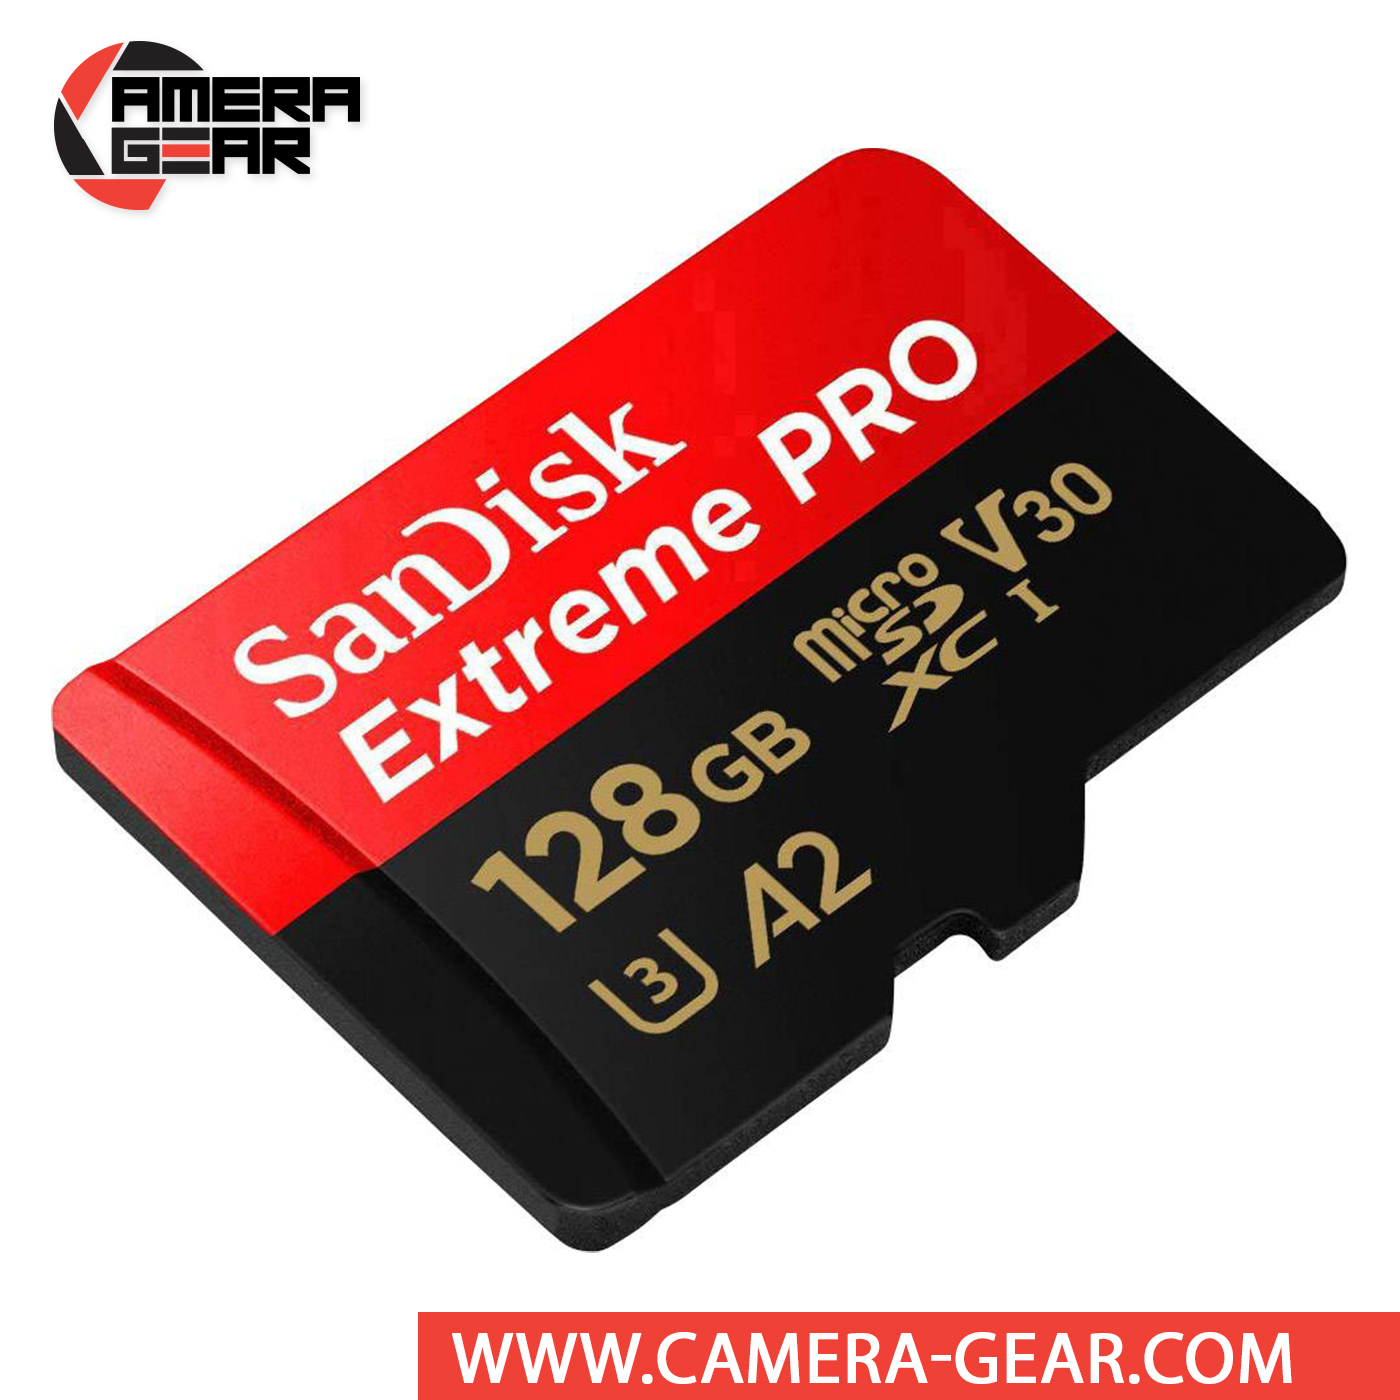 SanDisk Extreme 64GB microSD UHS-I Card with Adapter - Up to 160MB/s with  SanDisk MobileMate USB 3.0 microSD Card Reader